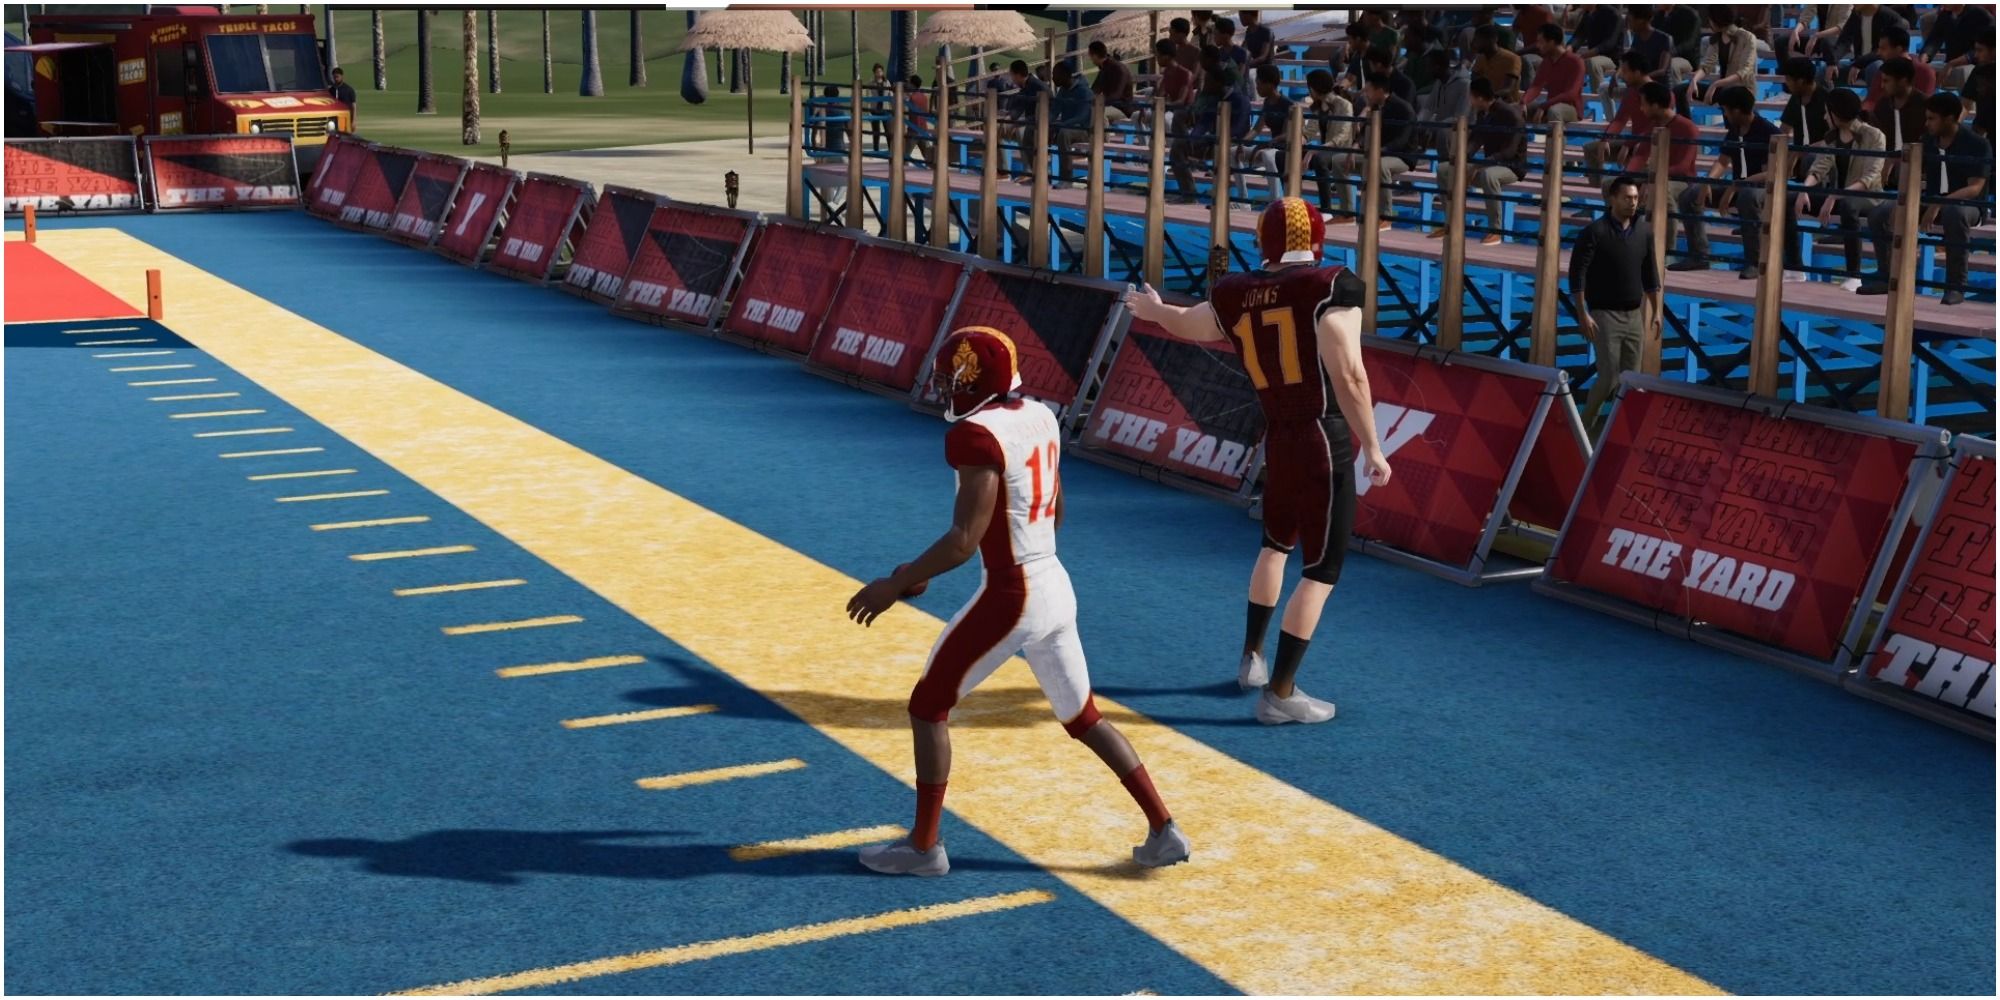 Madden NFL 22 Celebrating A First Down In The Yard